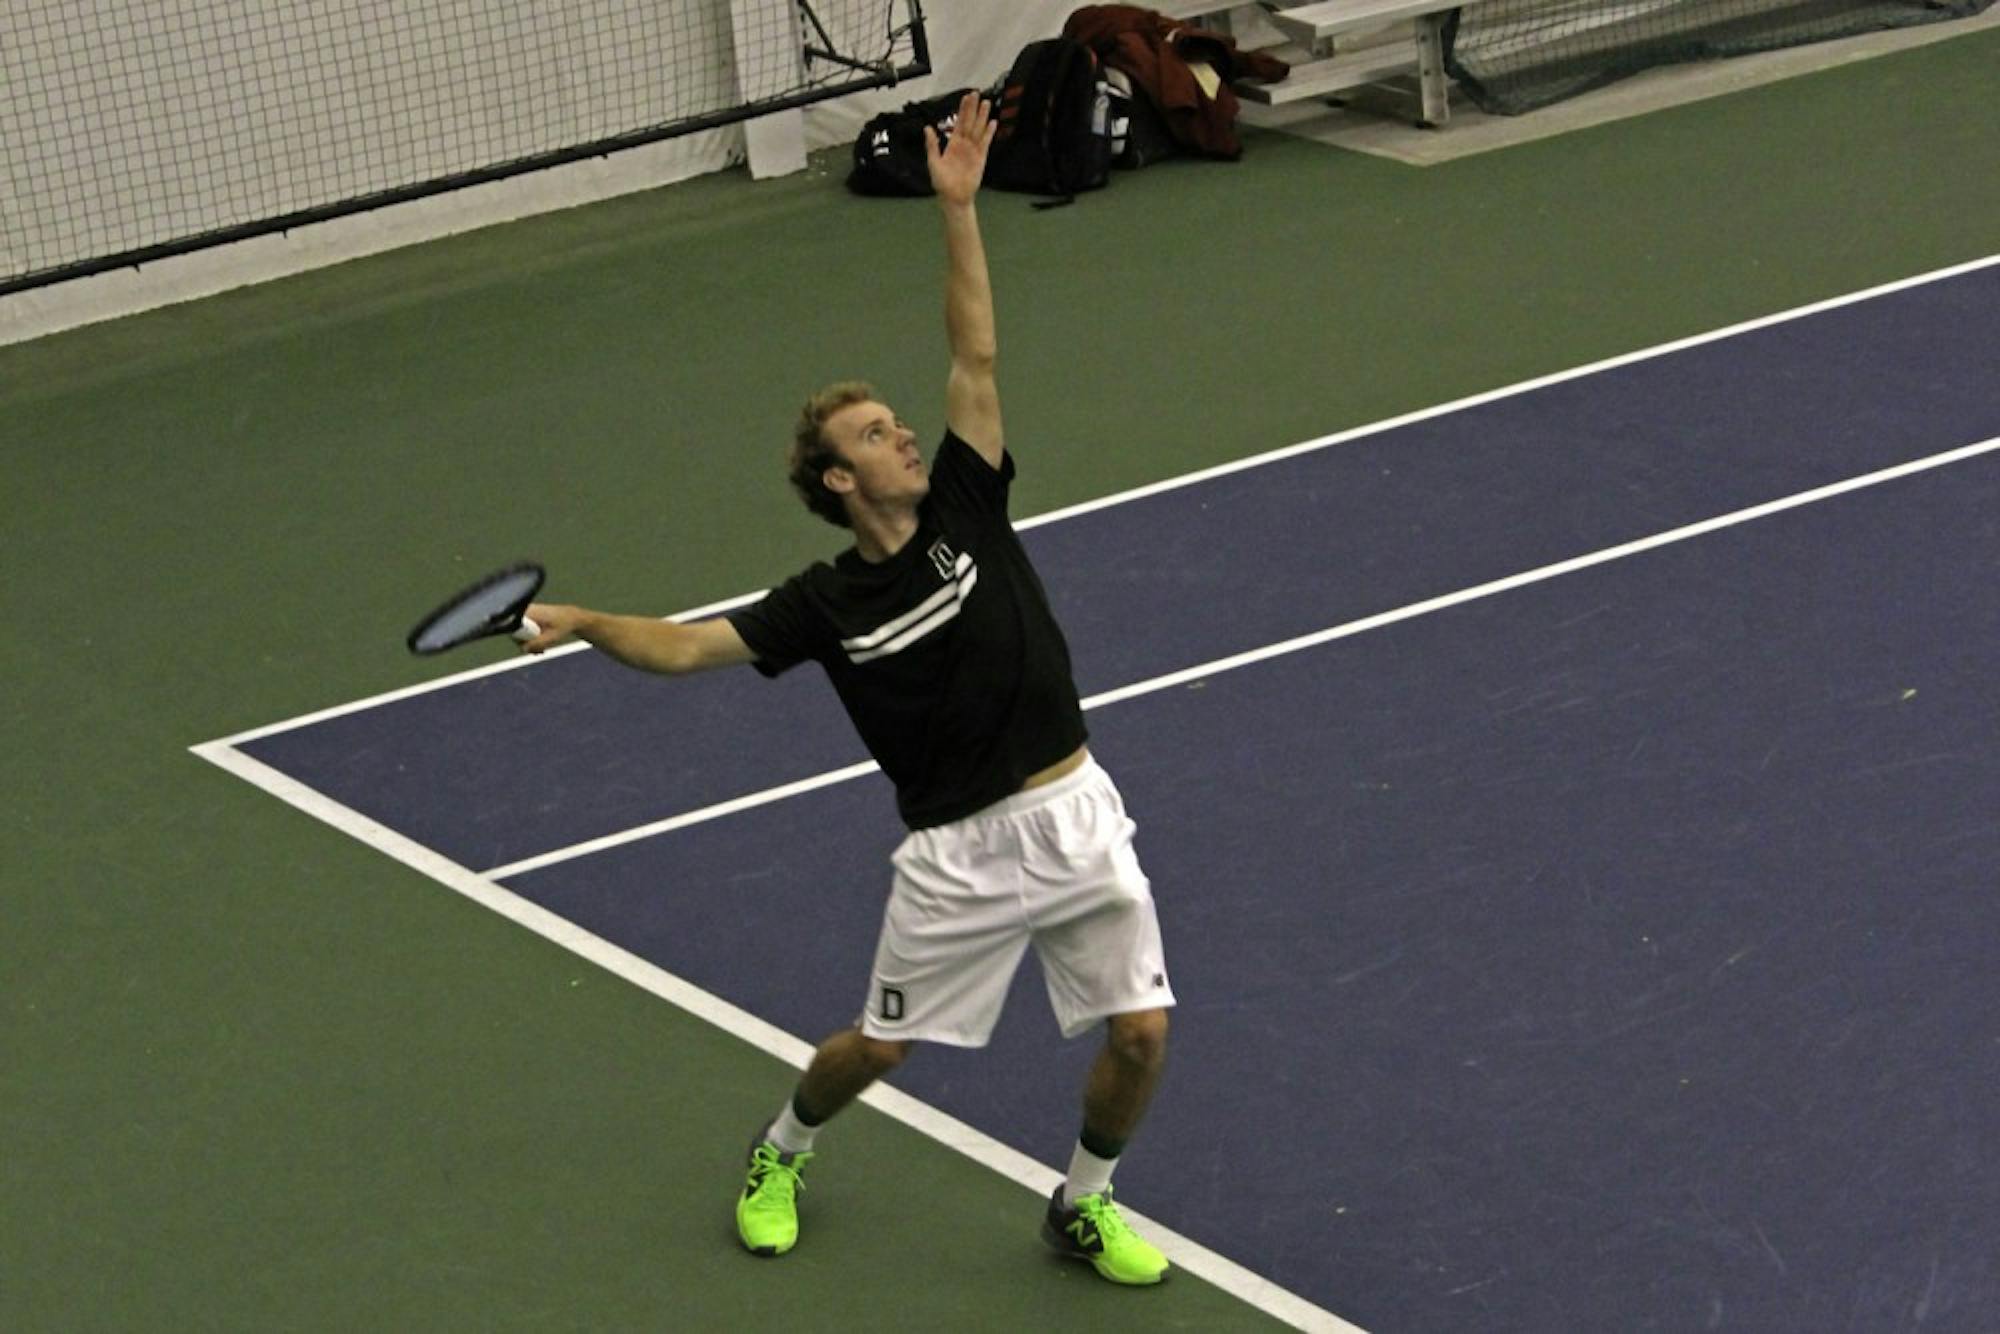 The men’s tennis team beat Denver, but lost a tight 4-3 match to Indiana.